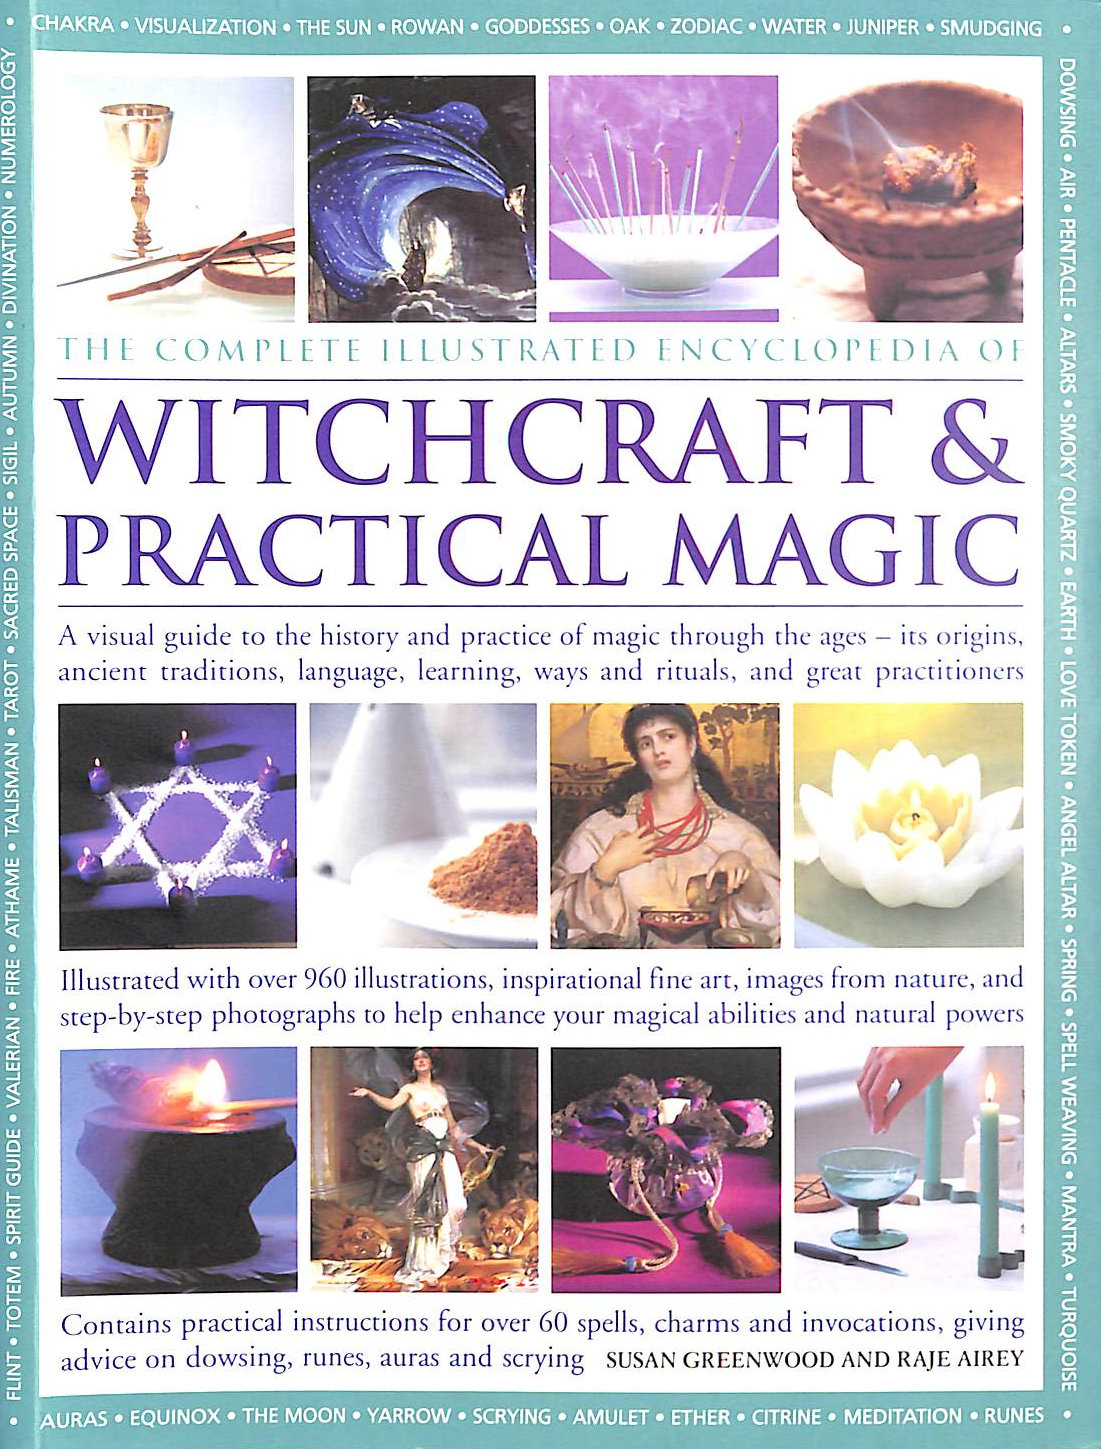 S GREENWOOD. R AIREY - The Complete Illustrated Encyclopedia of Witchcraft and Practical Magic: A Visual Guide to the History and Practice of Magic Through the Ages - Its Origins, Traditions, Language, Learning, Rituals and Great Practitioners